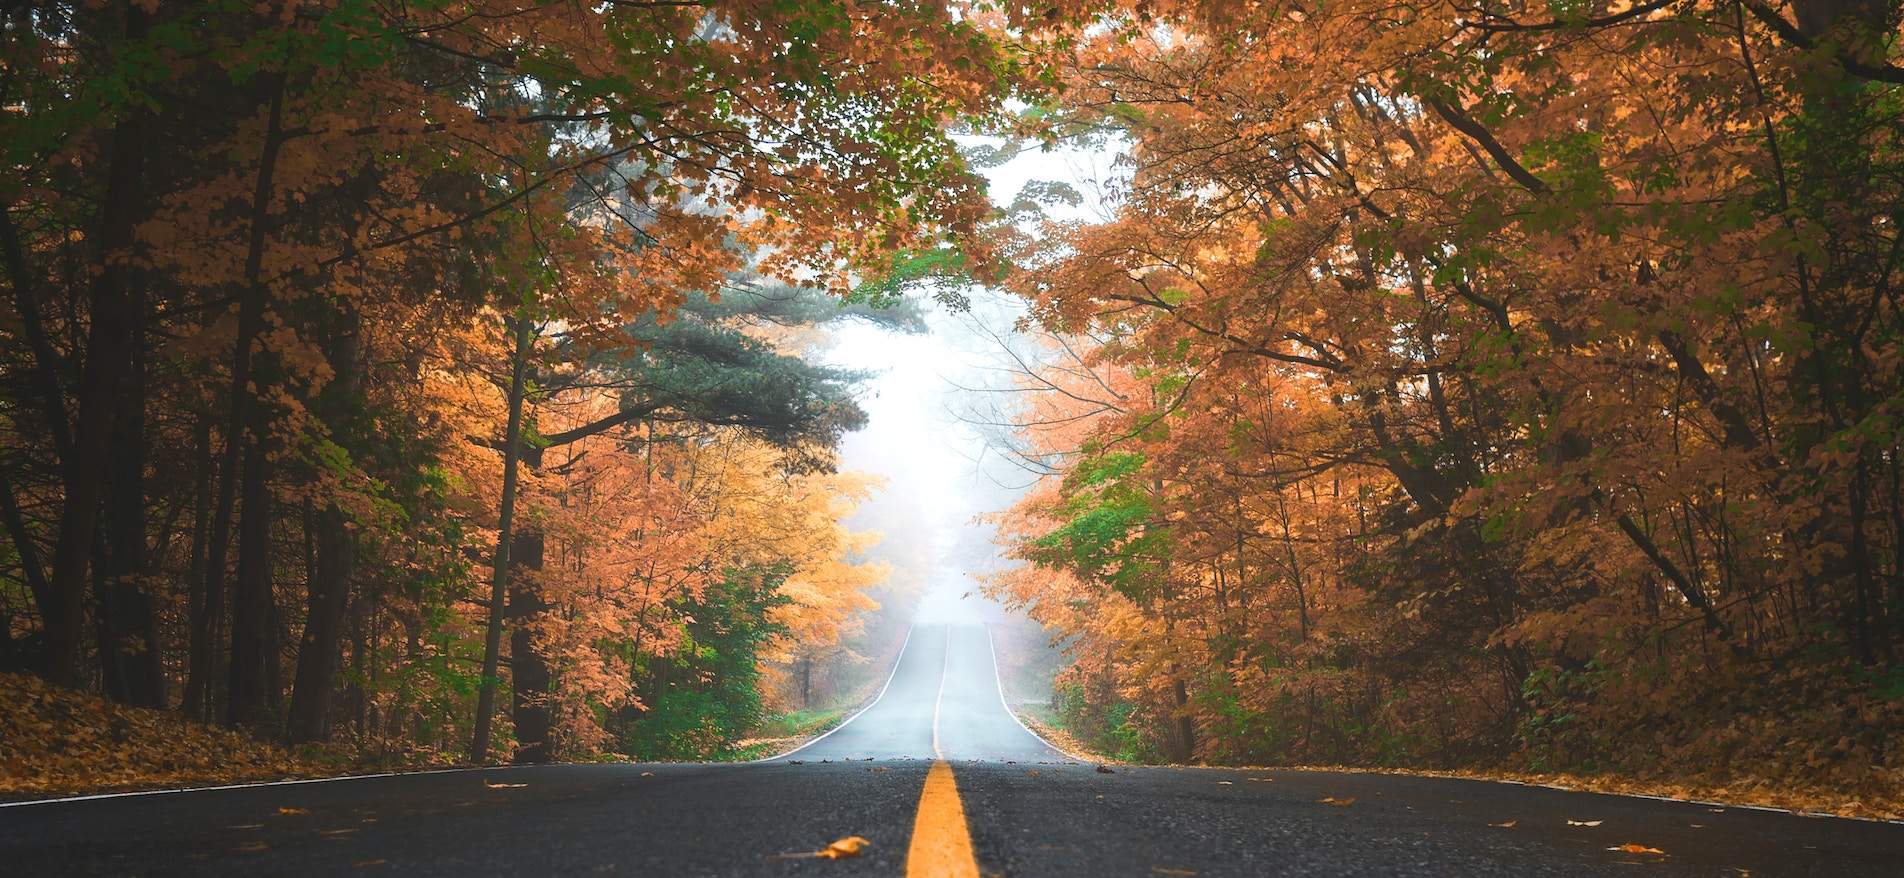 The Best Road Trips to Catch Fall Foliage